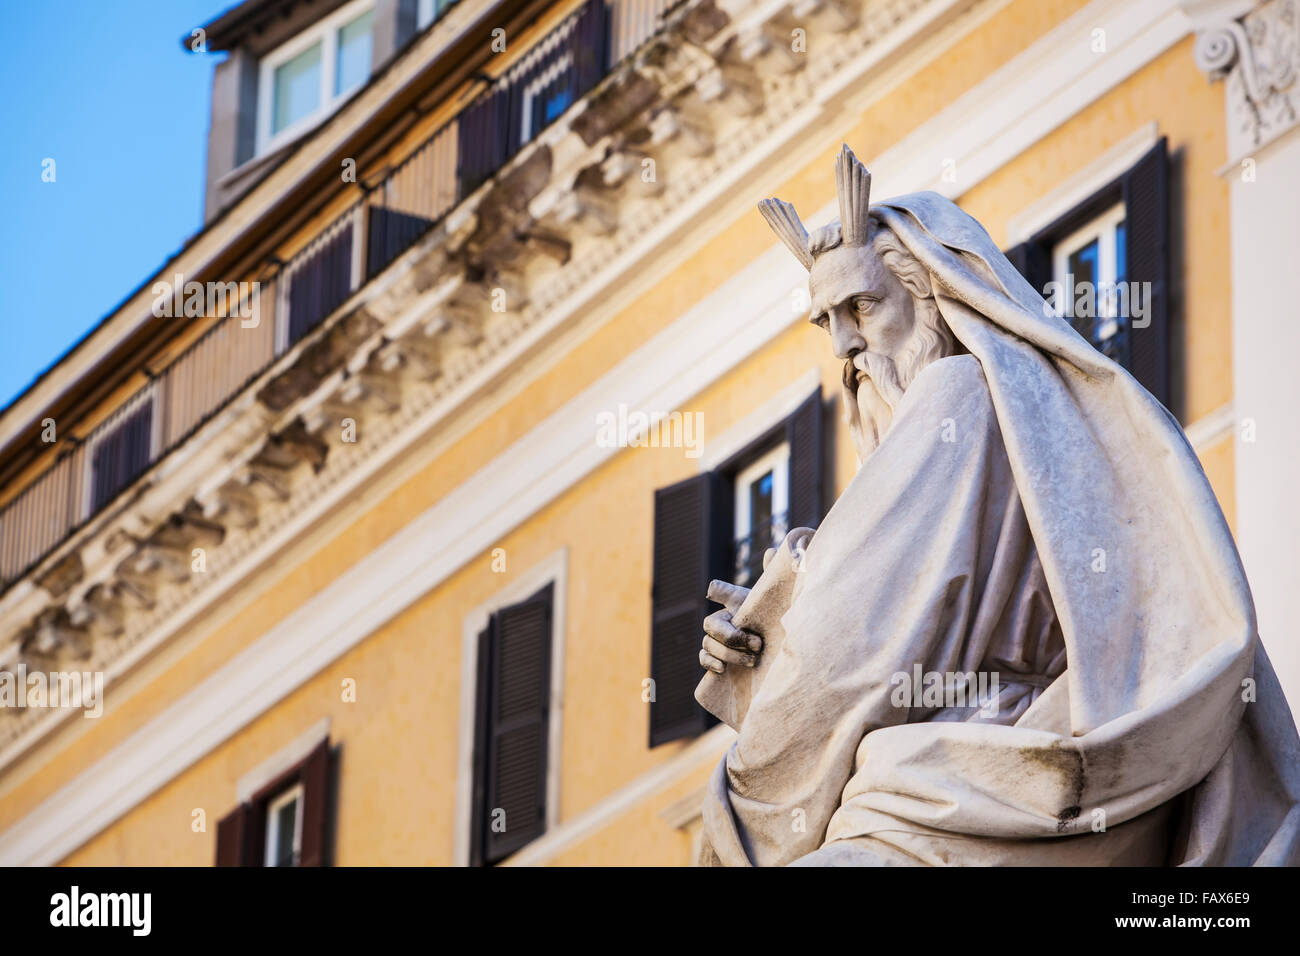 Statue of historical male figure and yellow building; Rome, Italy Stock Photo